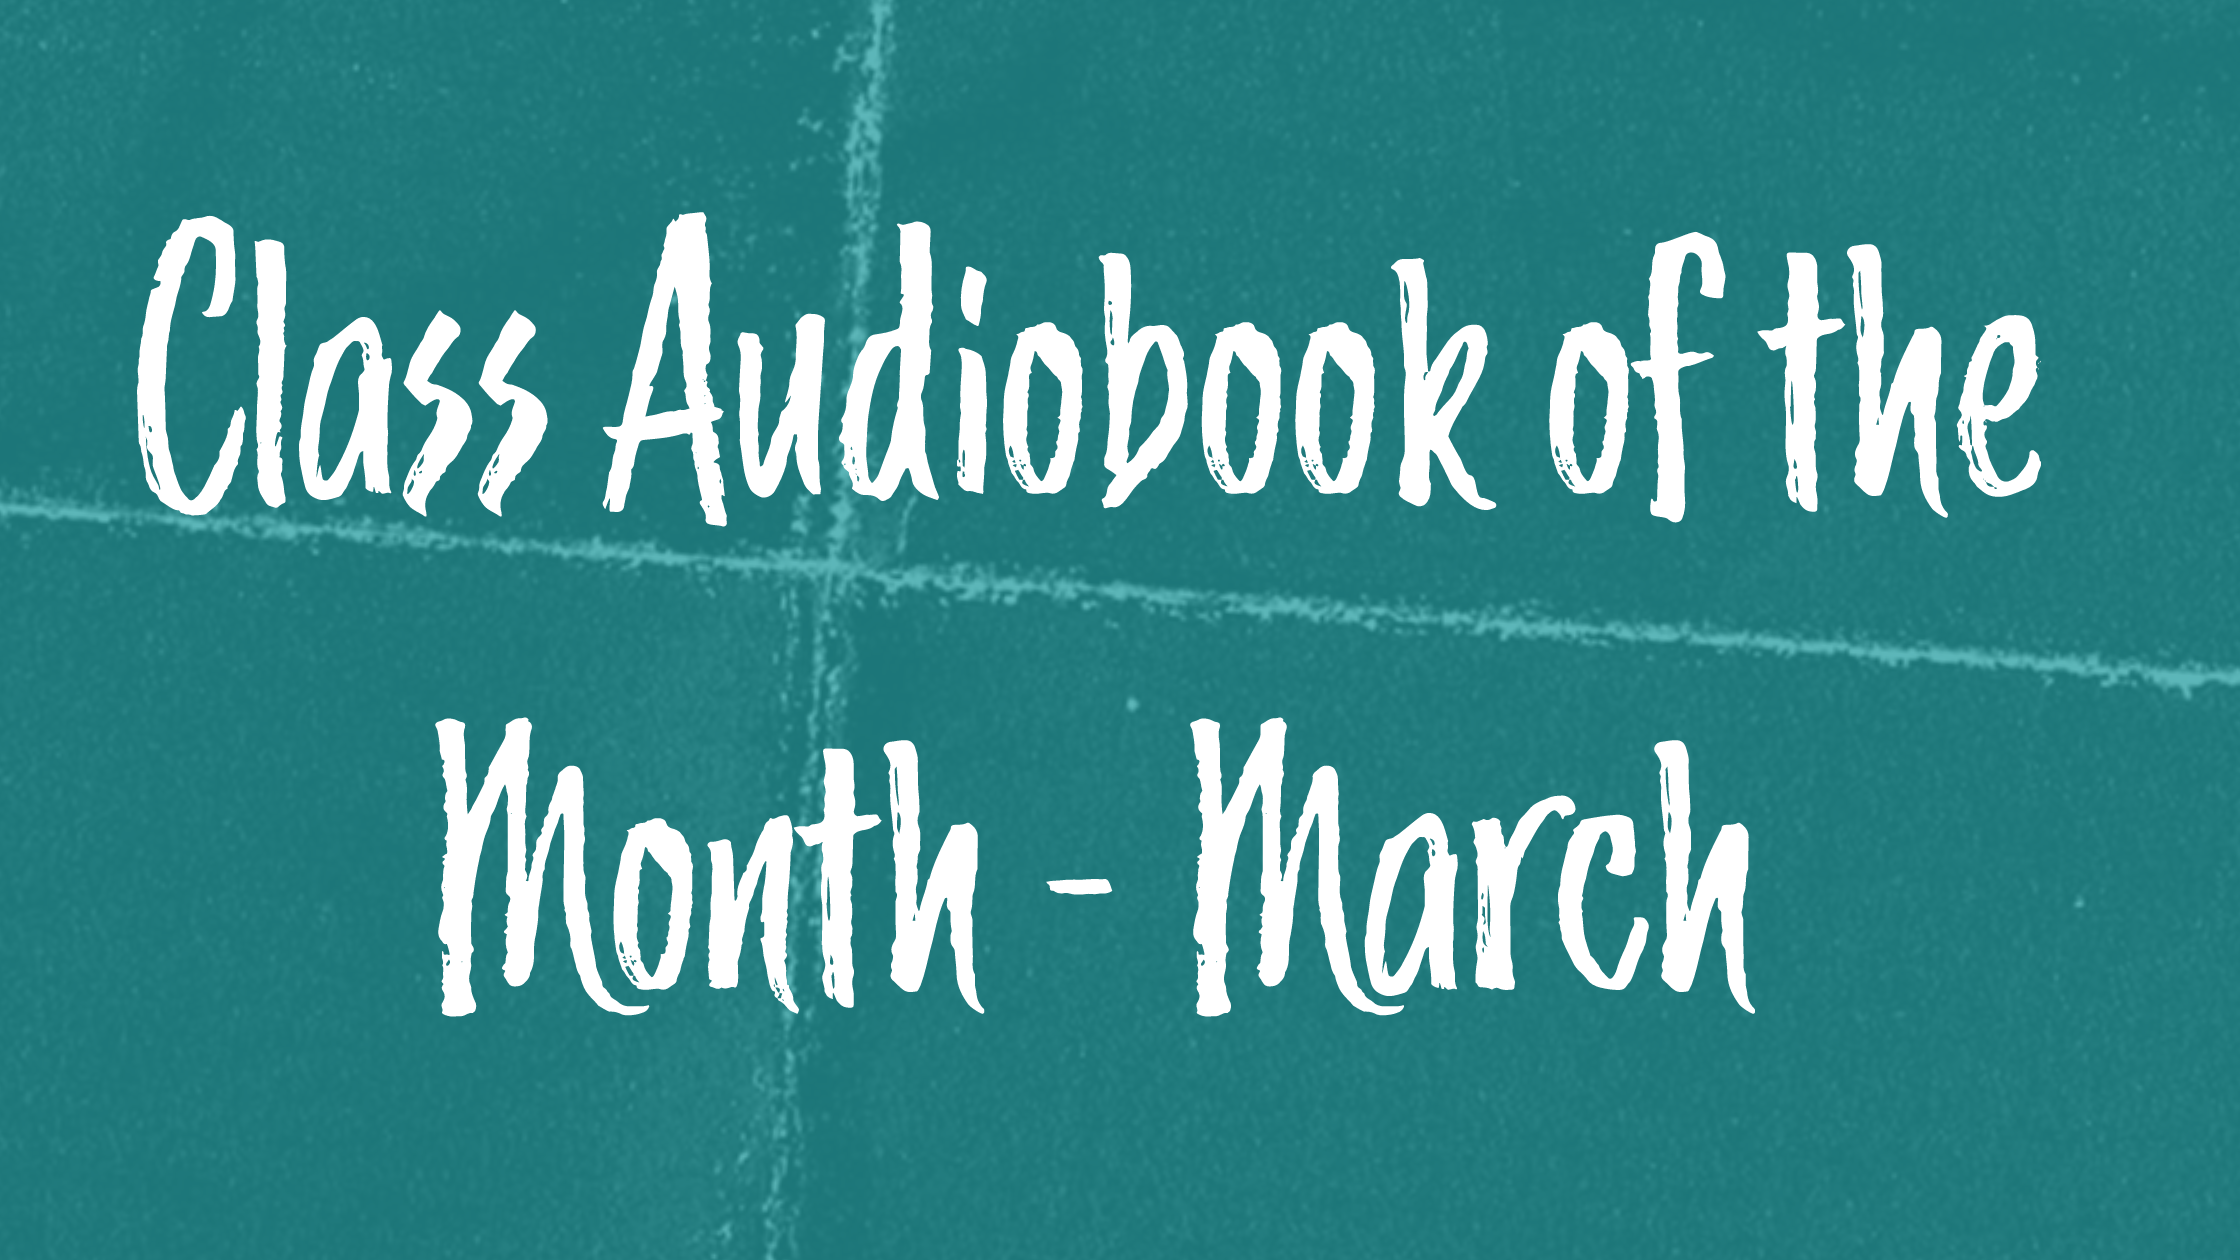 Class Audiobook of the Month - March